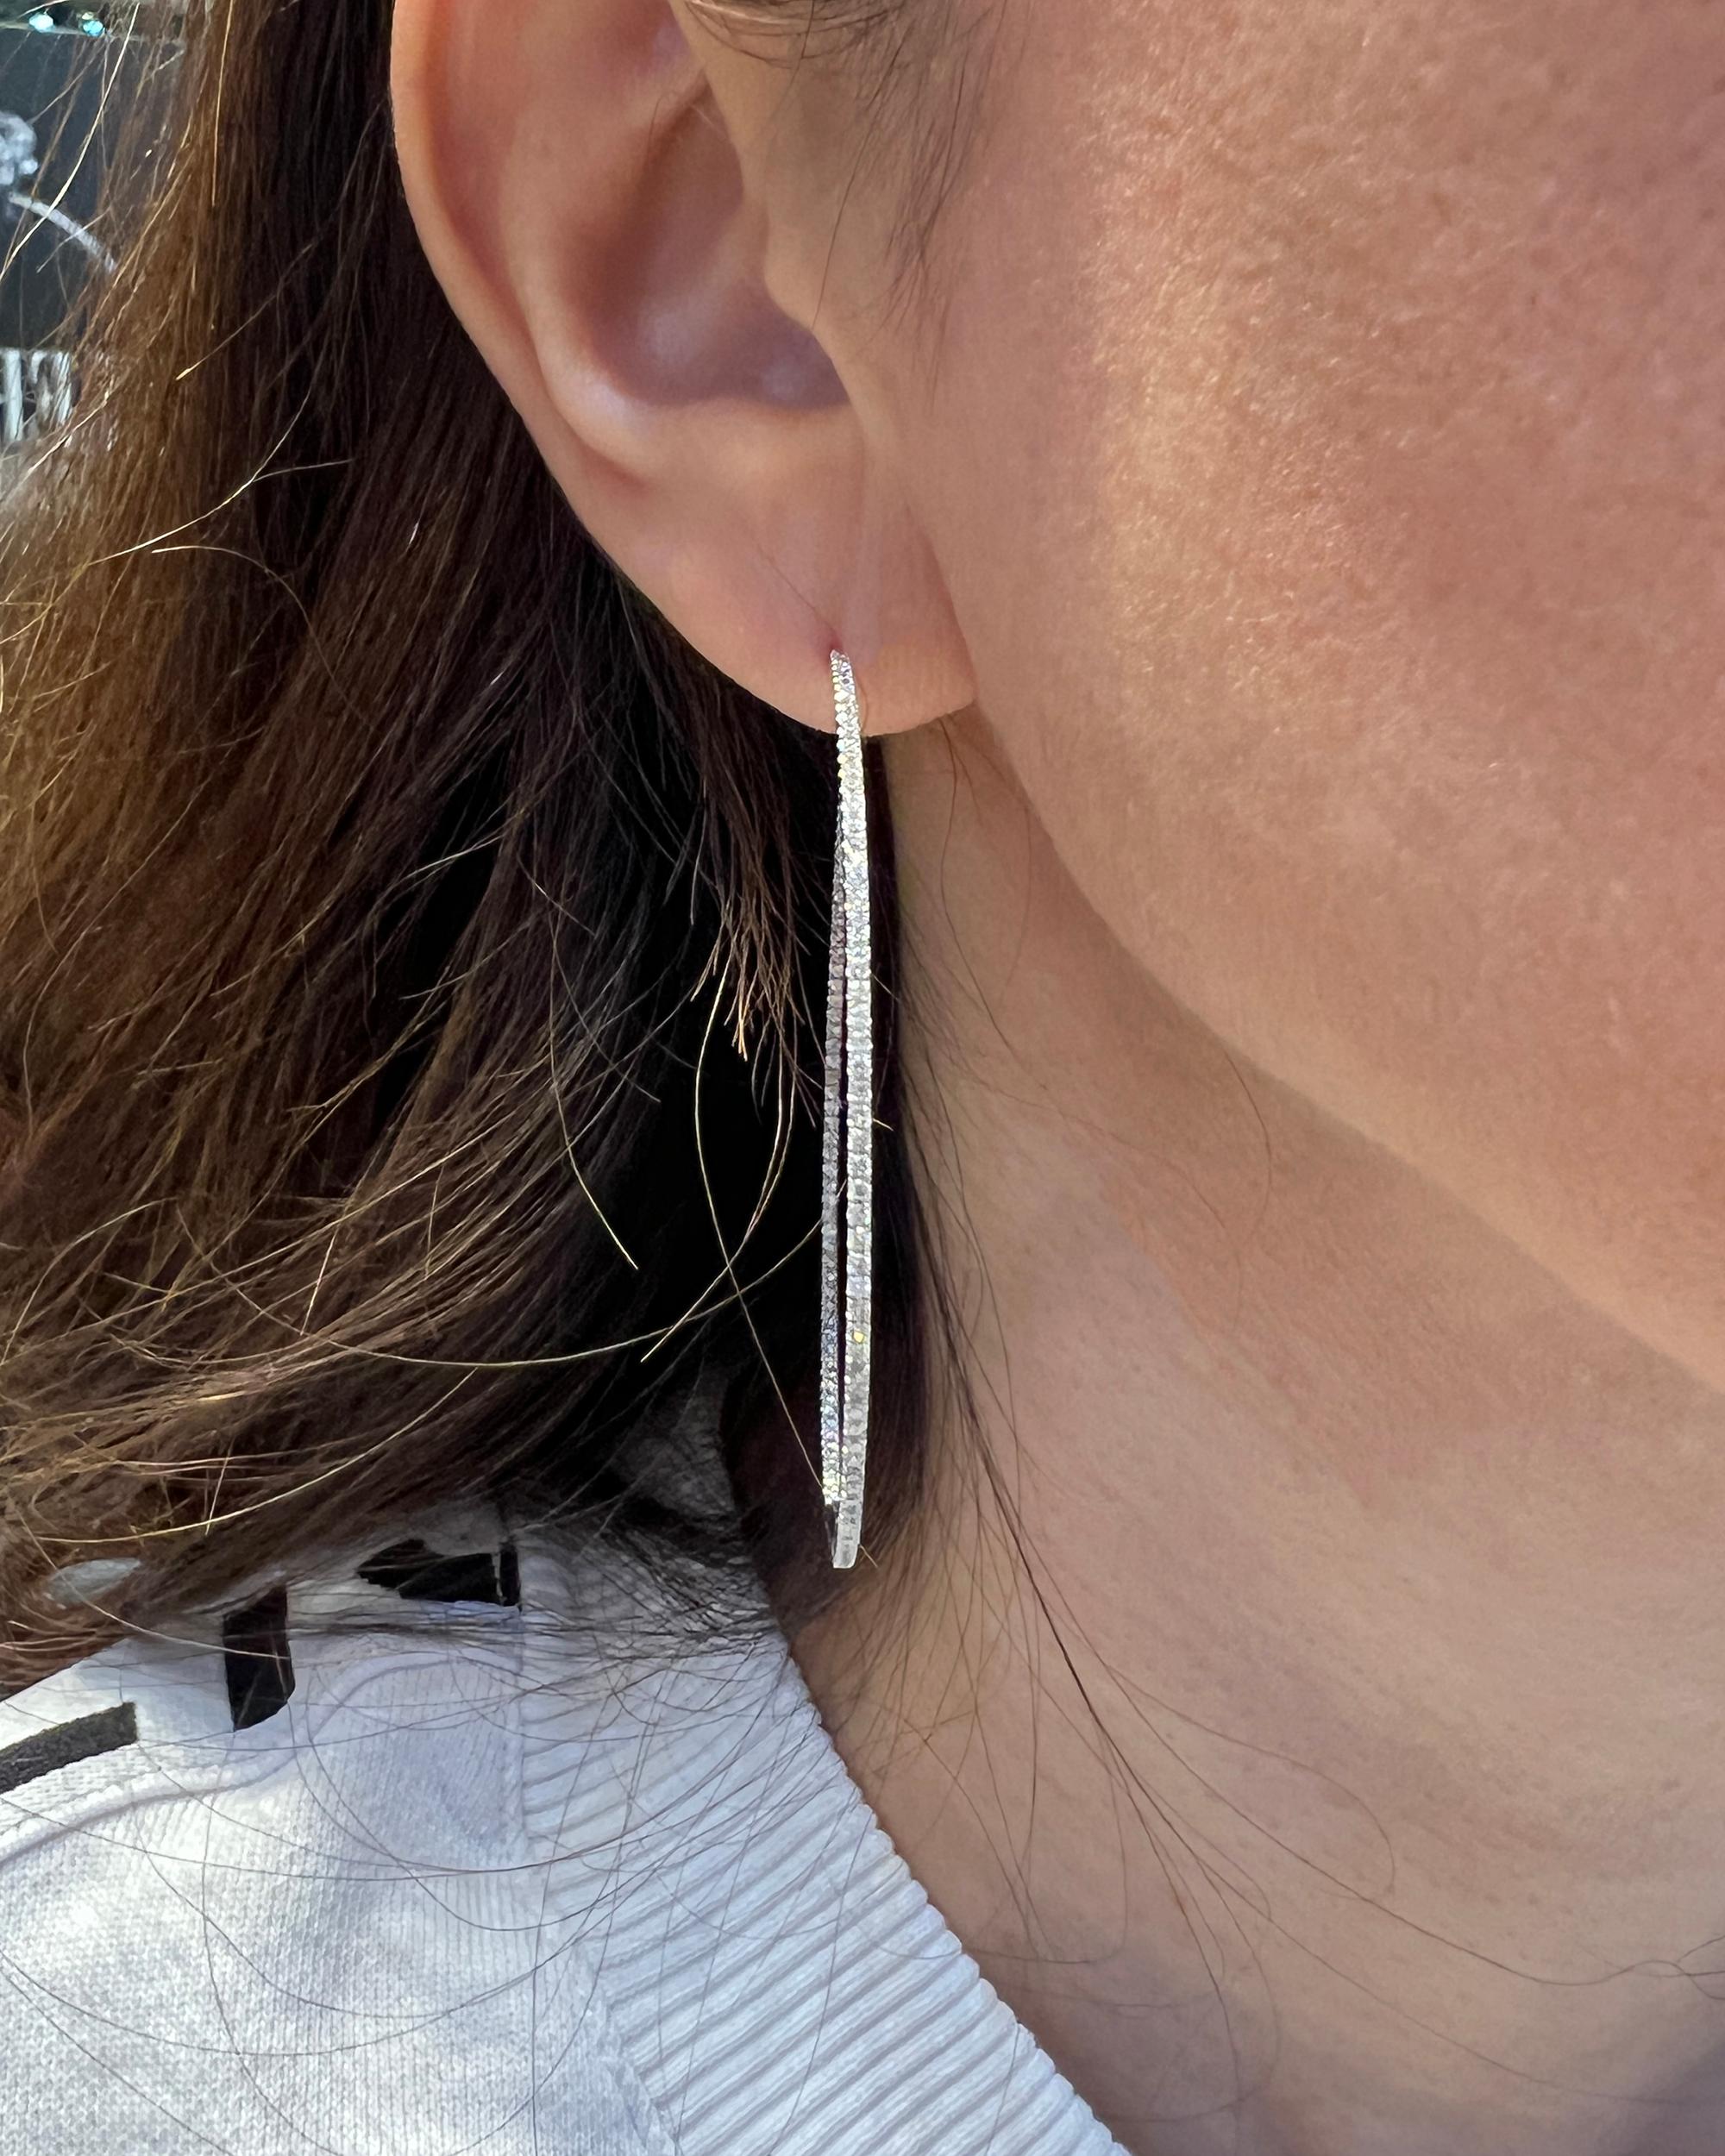 It is hard to believe that any accessory can have such staying power, but the hoop has been adorning earlobes since the ancient civilizations of Mesopotamia and Sumeria - dating back to 2500 BCE. Today, any look can be brought together with the